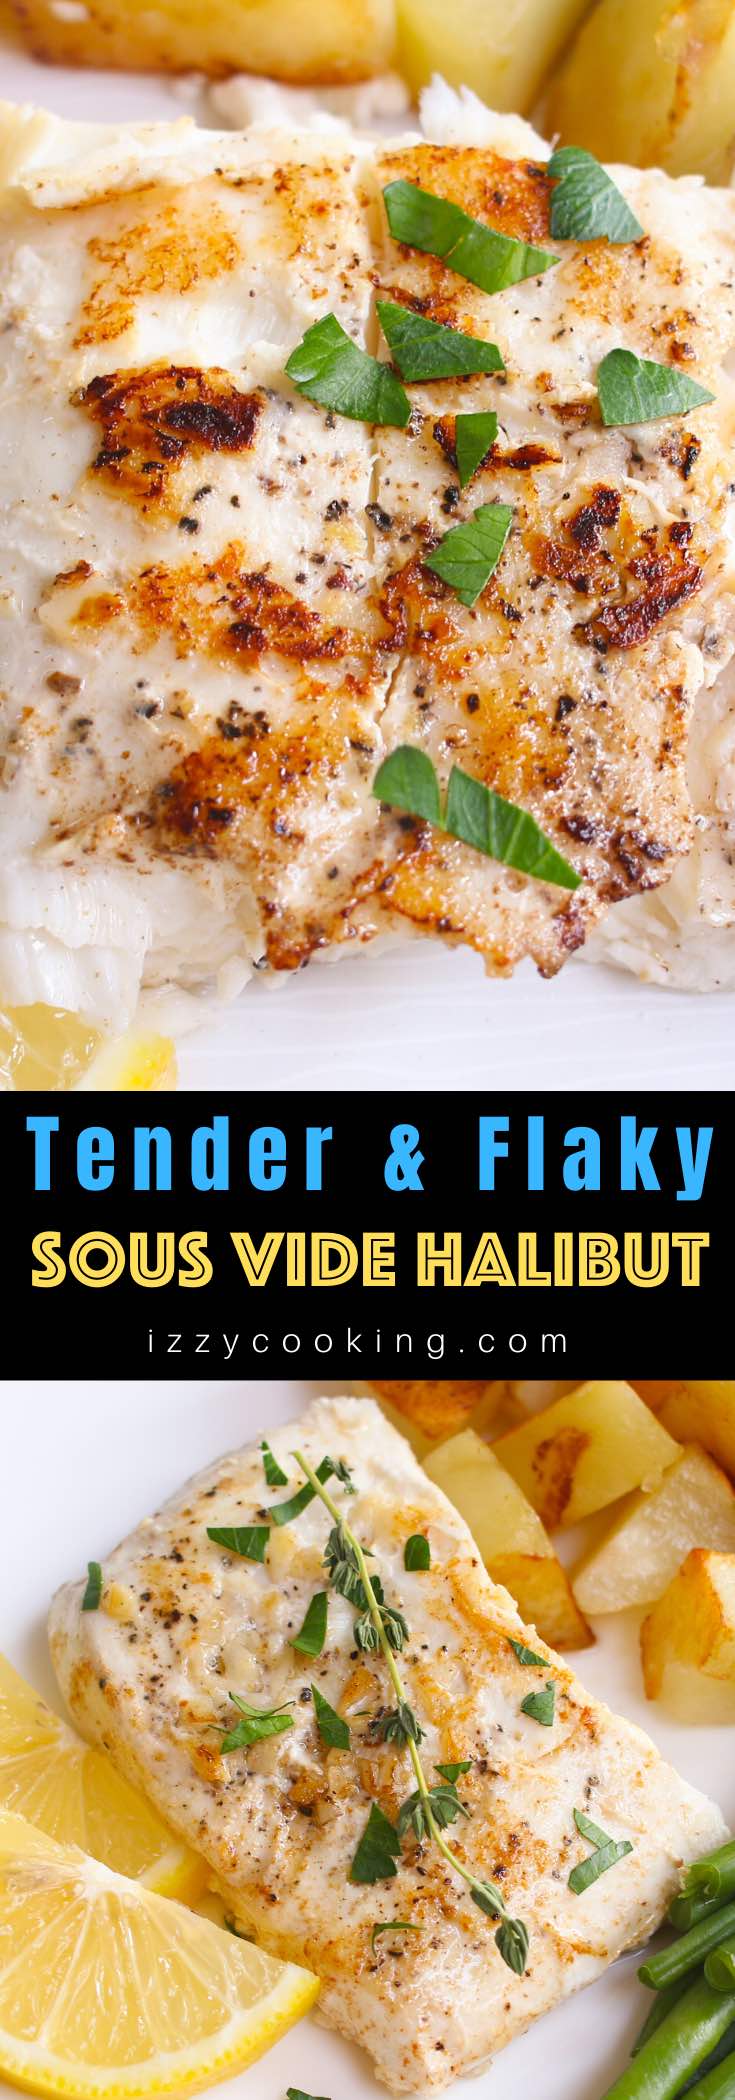 Sous Vide Halibut – tender and buttery halibut that’s full of delicious garlic butter flavor! The sous vide method cooks it to the precise temperature you set, and then finish with a quick searing to get the halibut beautifully browned! #SousVideHalibut #SousVideFish